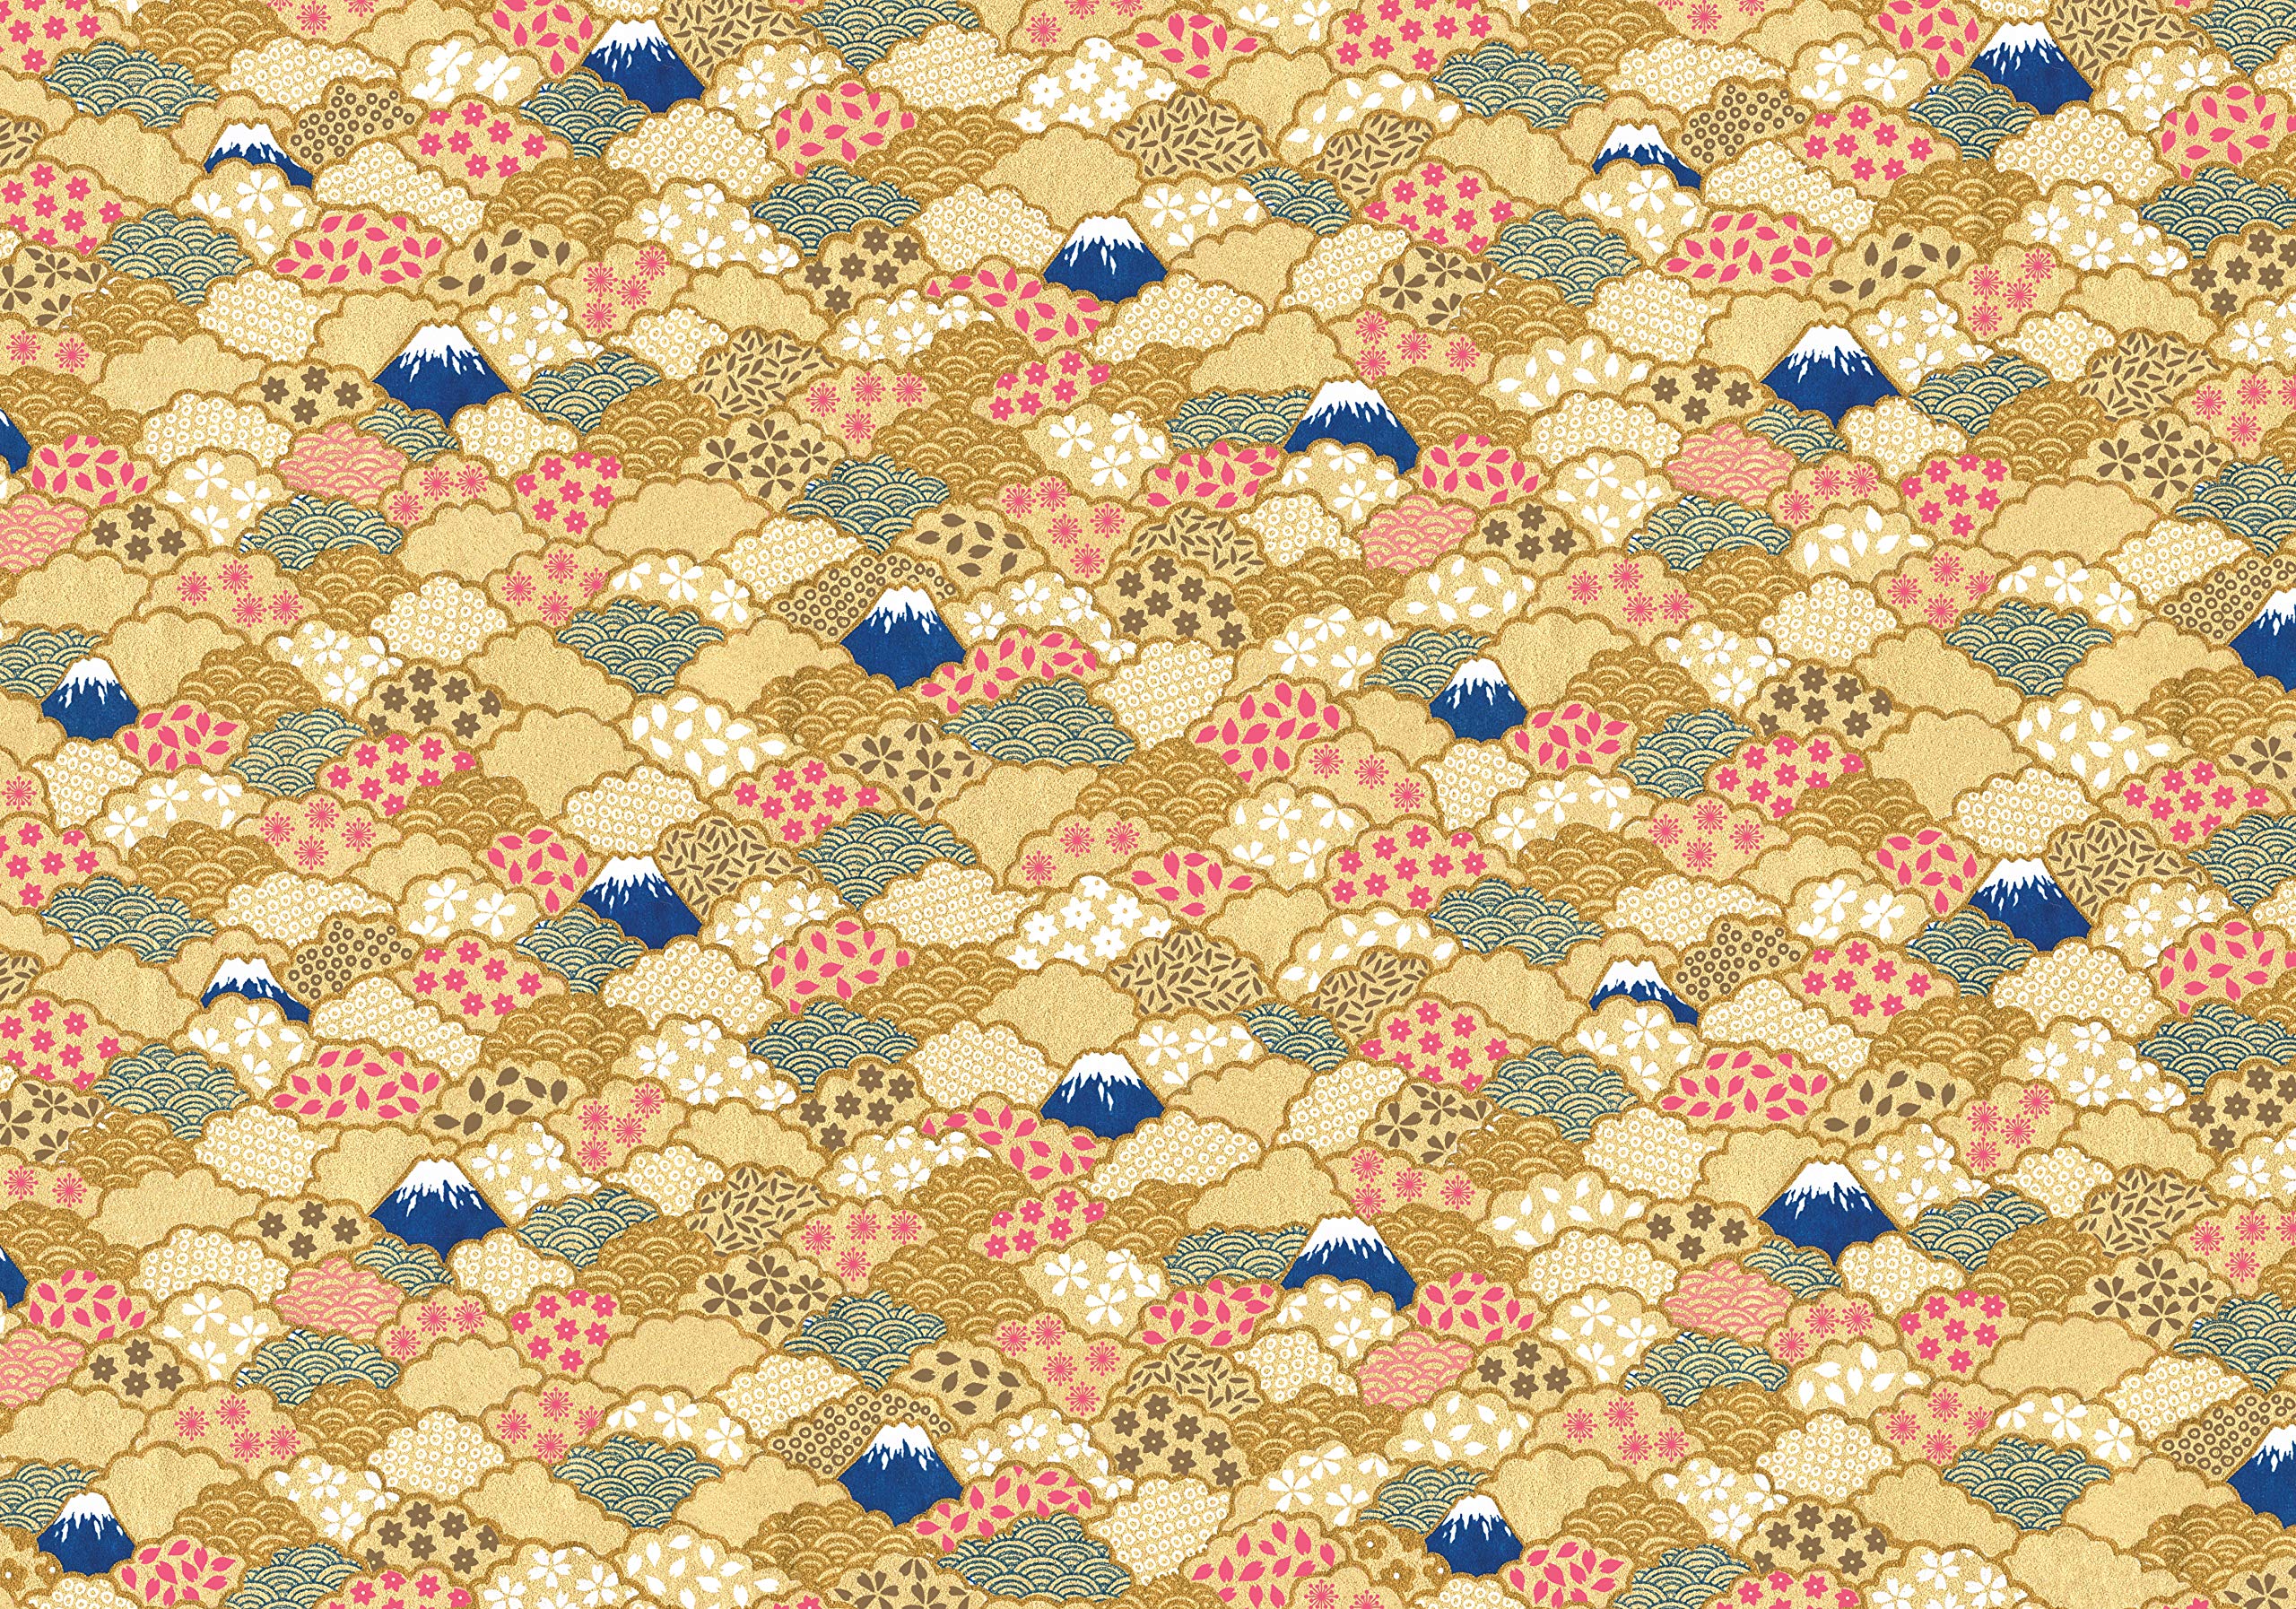 Japanese Washi Gift Wrapping Papers - 12 Sheets: 18 x 24 inch (45 x 61 cm)  Wrapping Paper